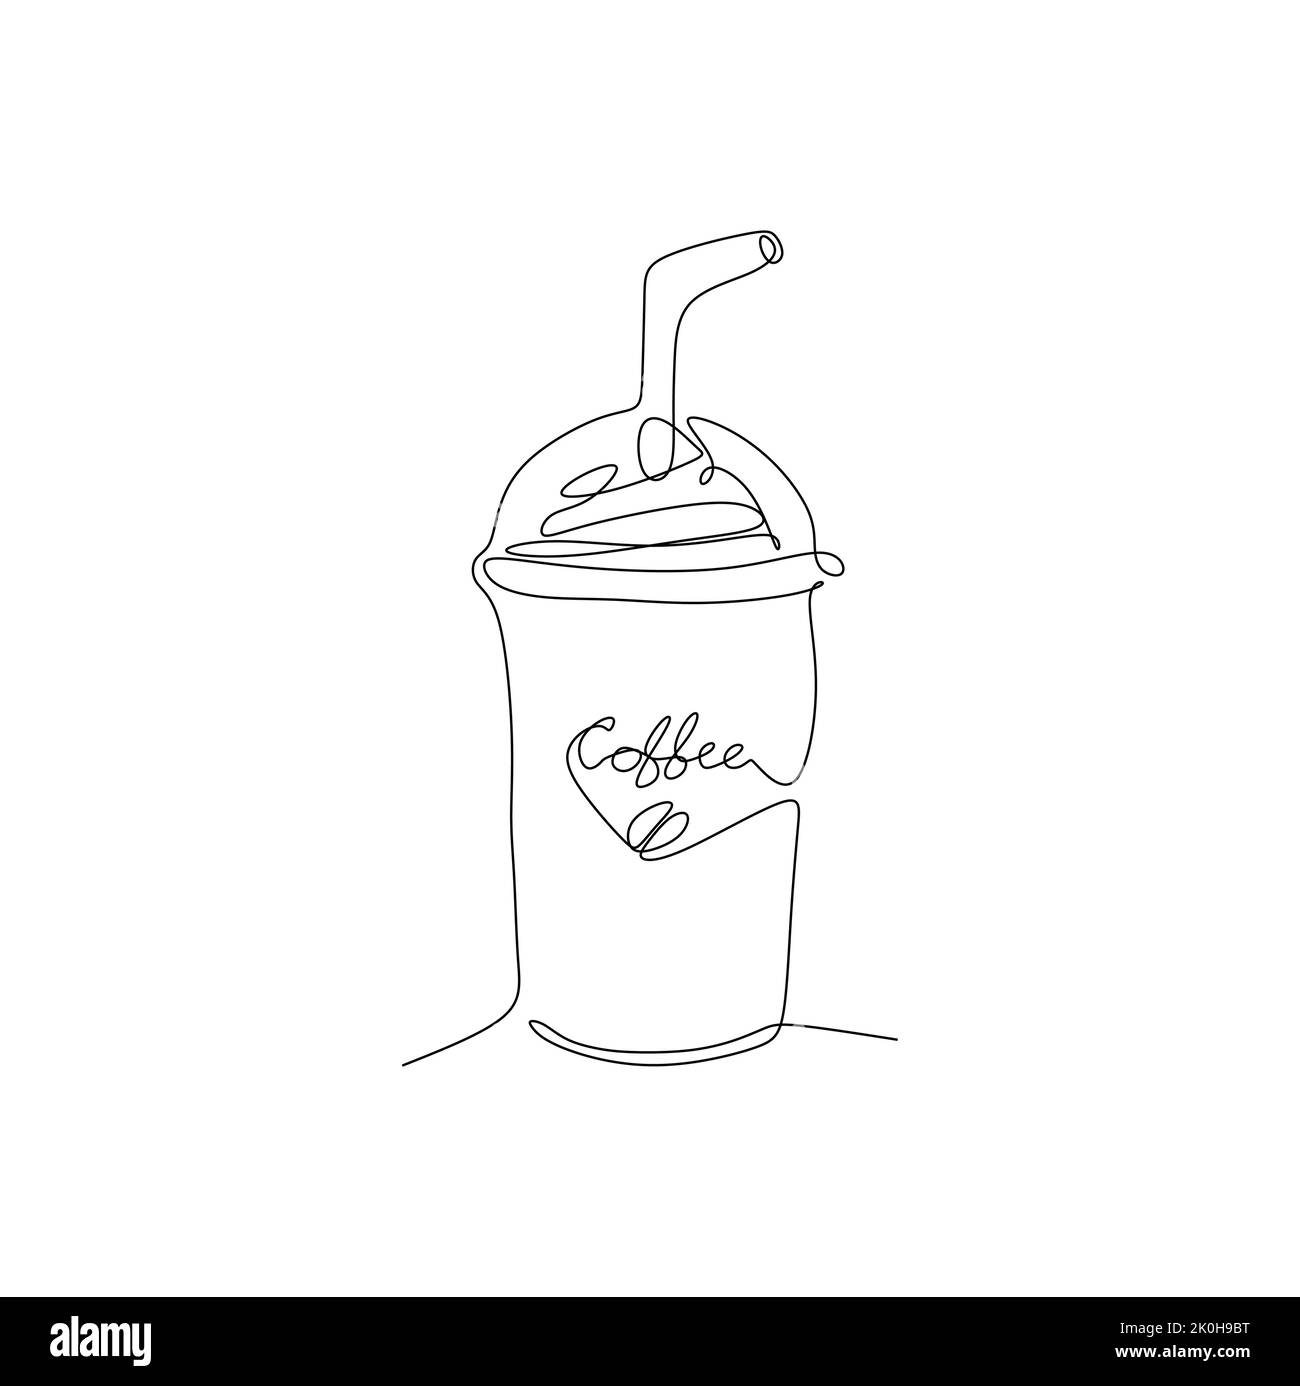 Frappuccino coffee in a plastic cup with straw. Continuous single line drawing vector illustration hand drawn style design for food and beverages draw Stock Vector